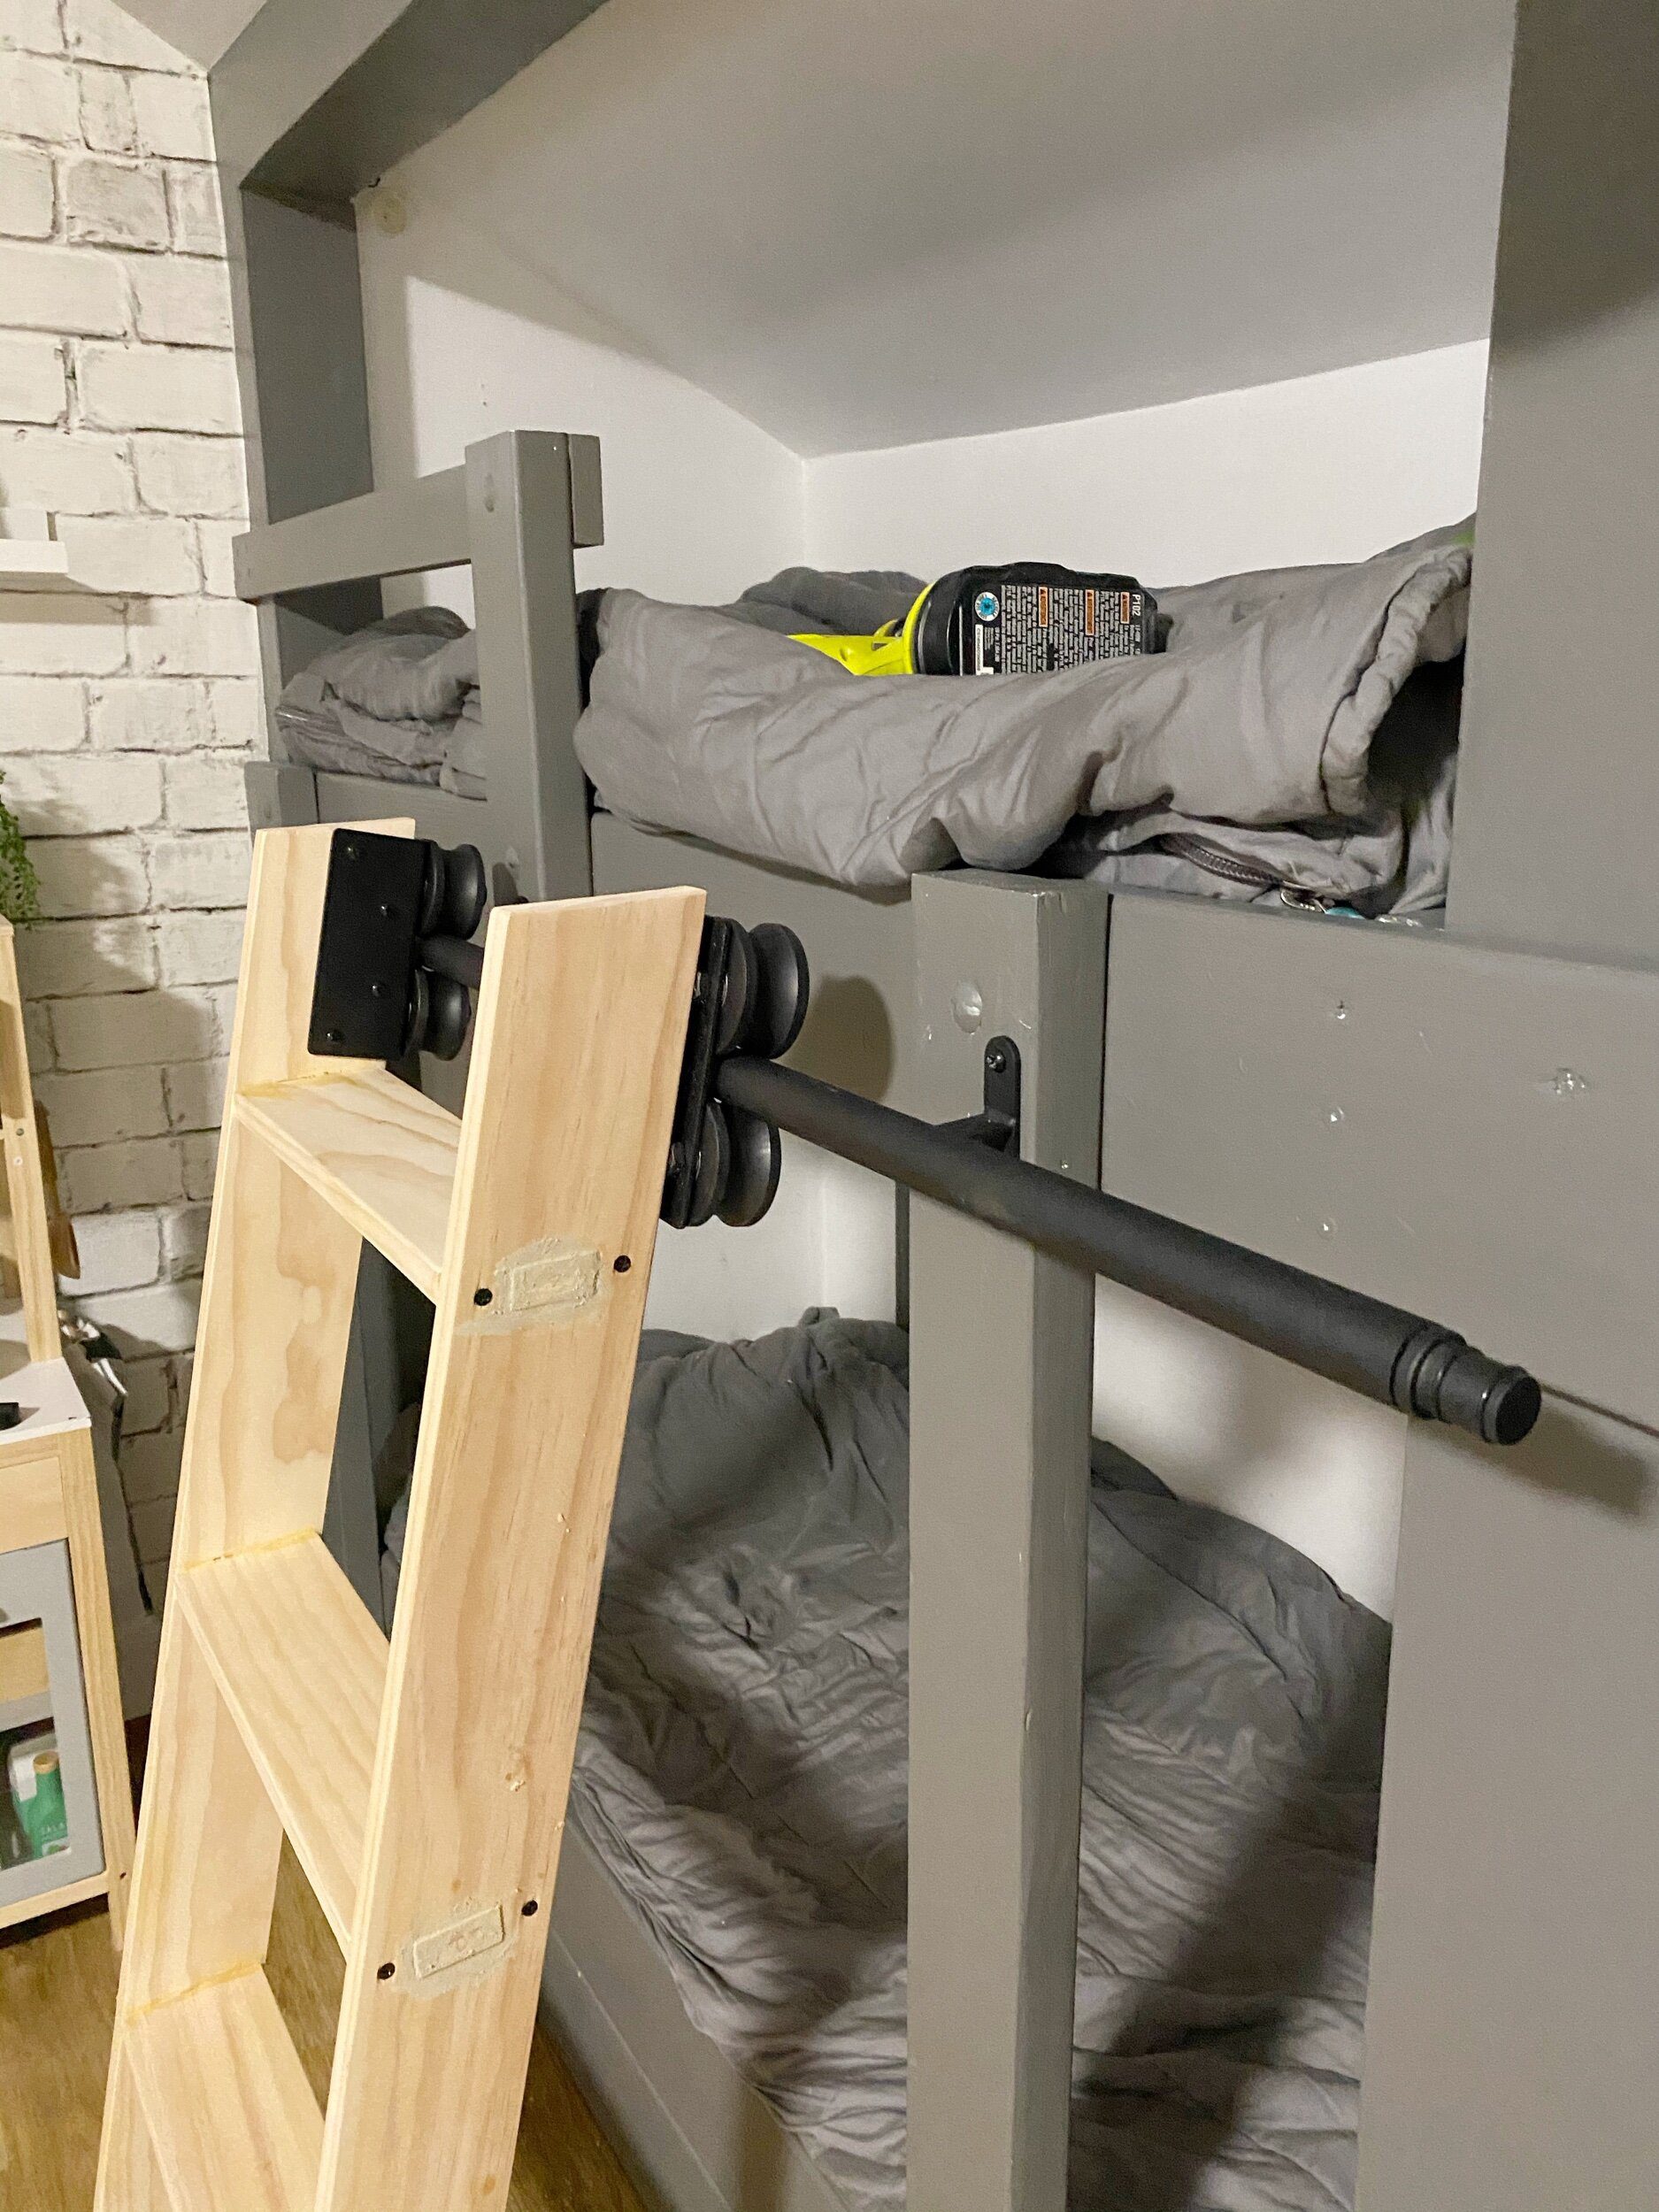 Diy Bunk Bed Library Ladder, How Wide Should A Bunk Bed Ladder Be